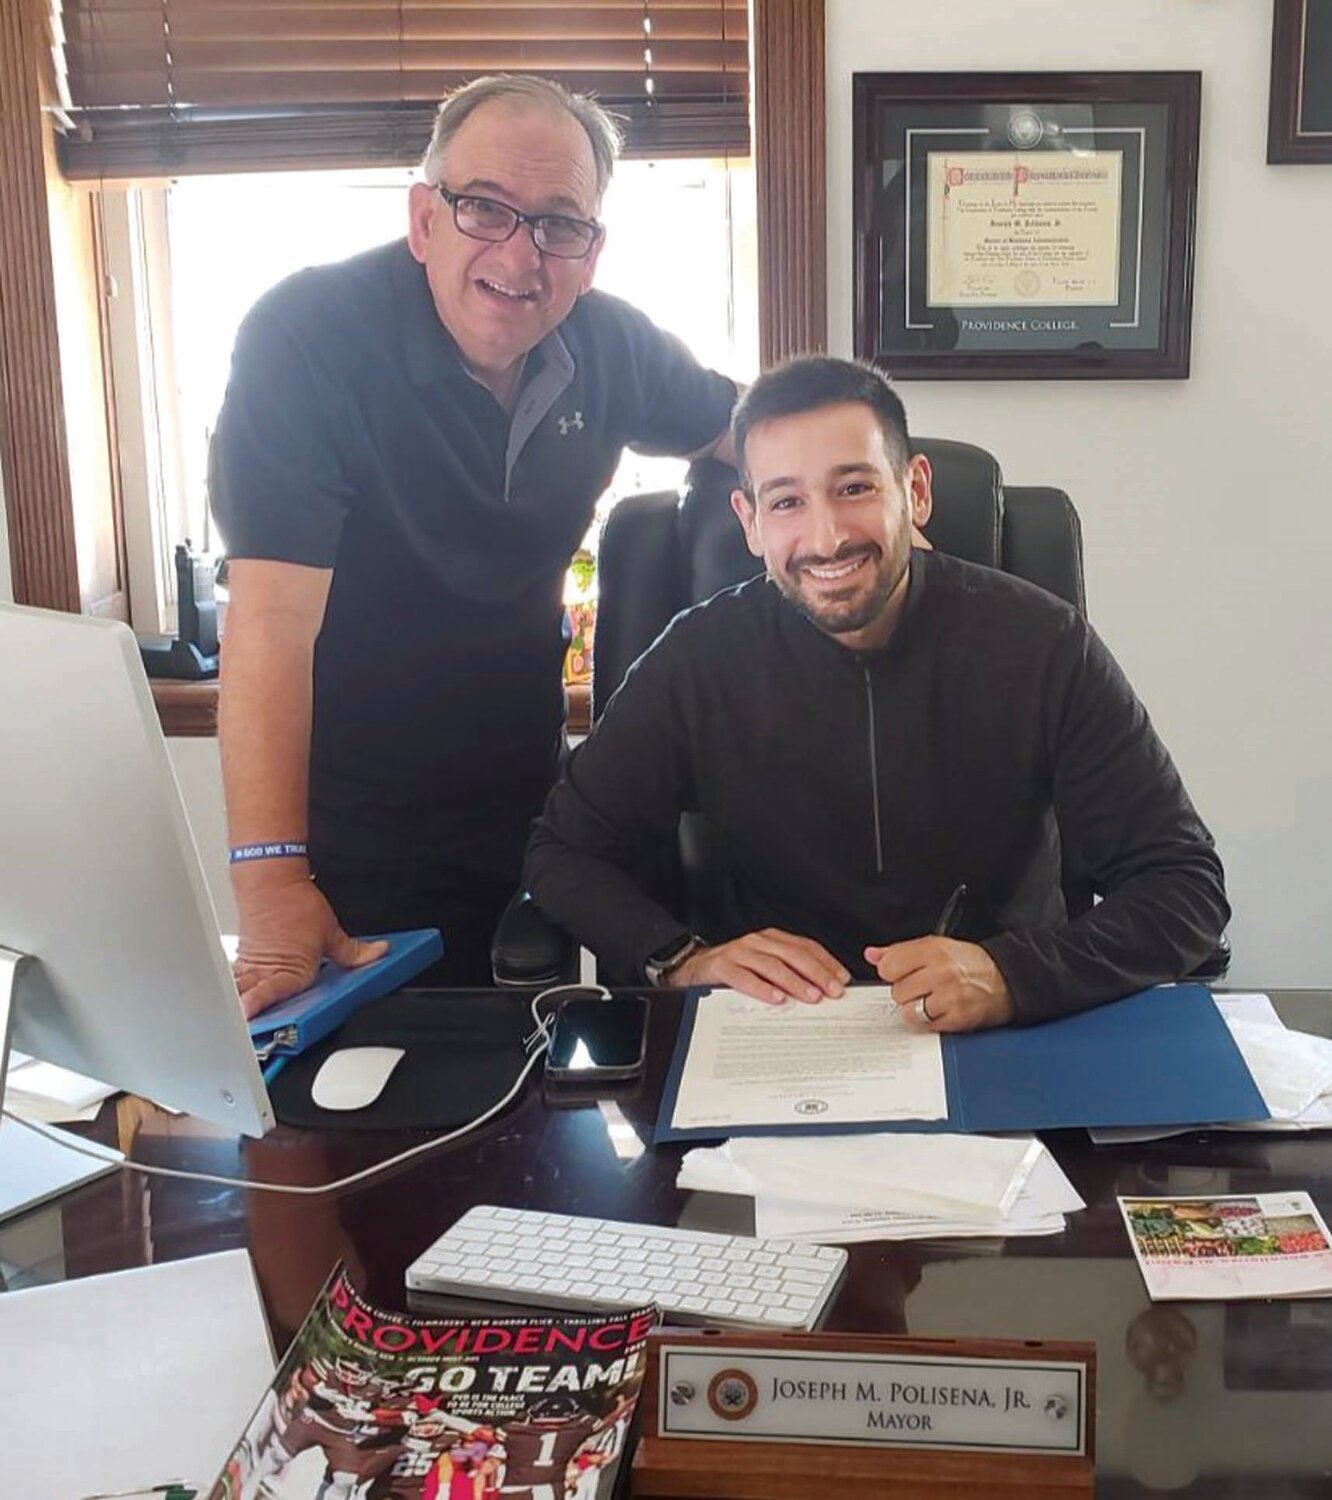 FROM JOHNSTON TO THE BOOT: Spirit of Hope founder Louis J. Spremulli poses with Johnston Mayor Joseph M. Polisena Jr. following their review of the “Sister City” agreement with Panni, Foggia, Italy.